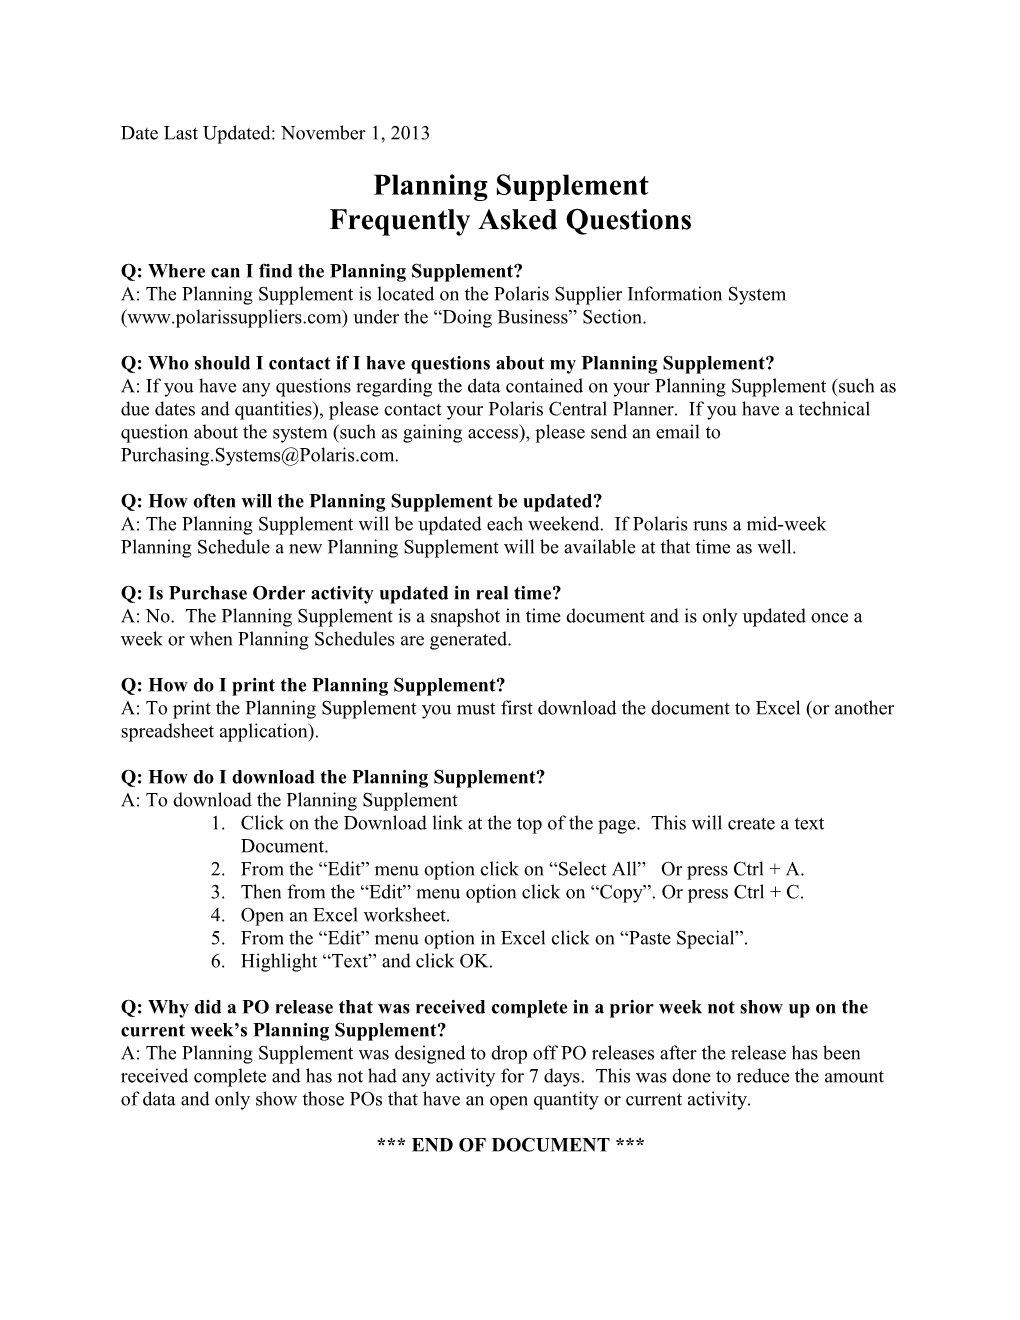 Q: Where Can I Find the Planning Supplement?